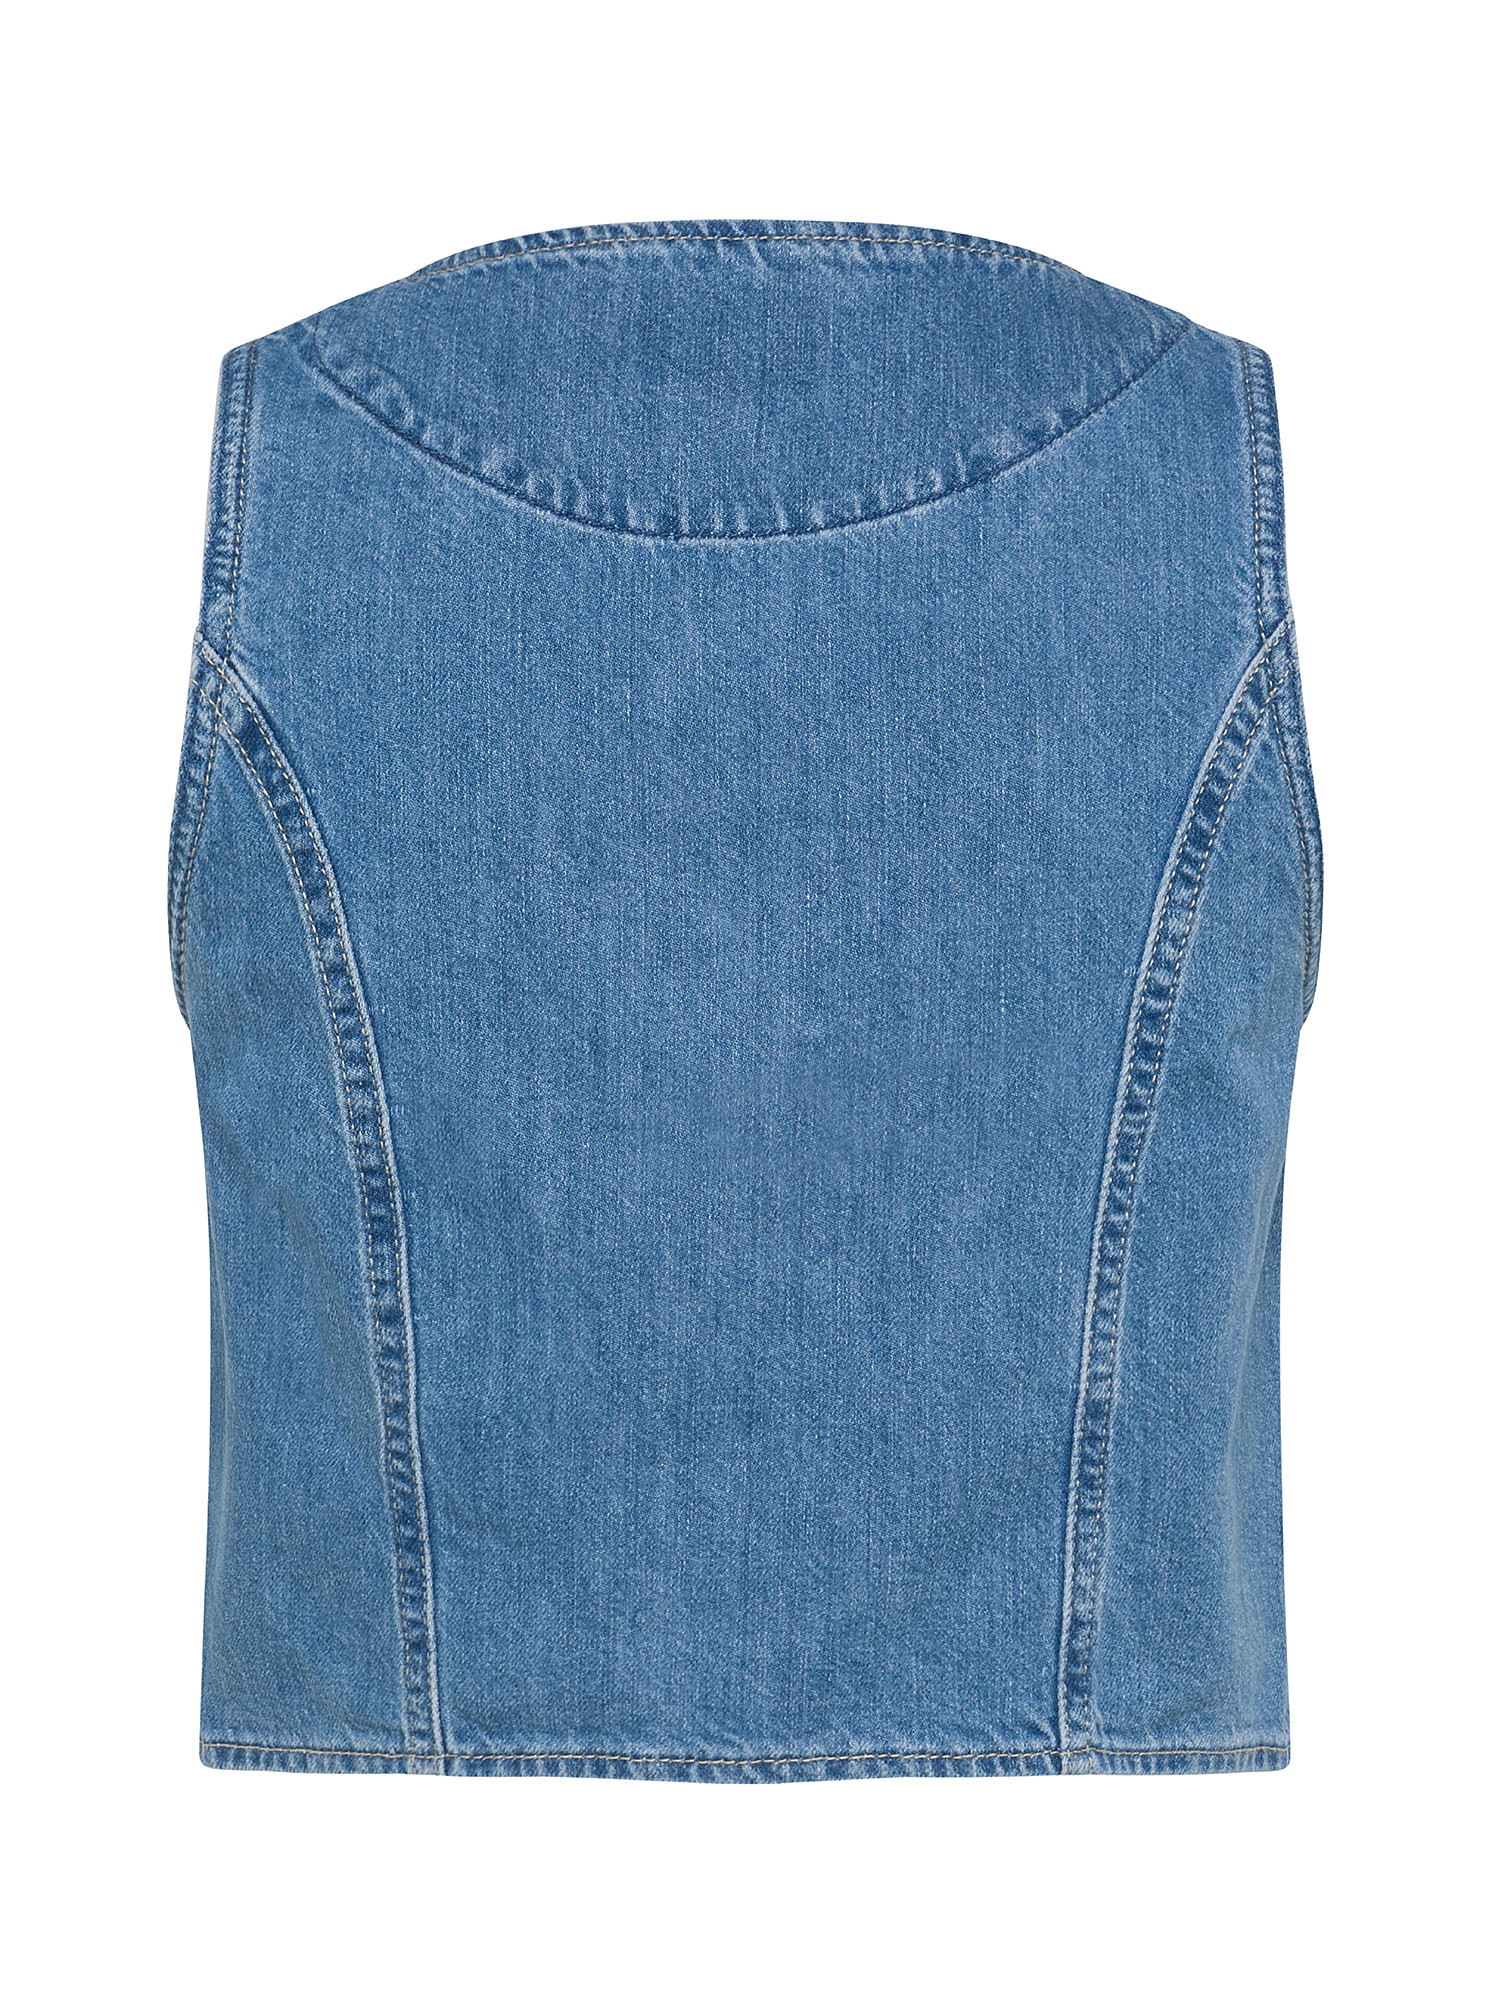 Pepe Jeans -  Gilet di jeans cropped, Denim, large image number 1